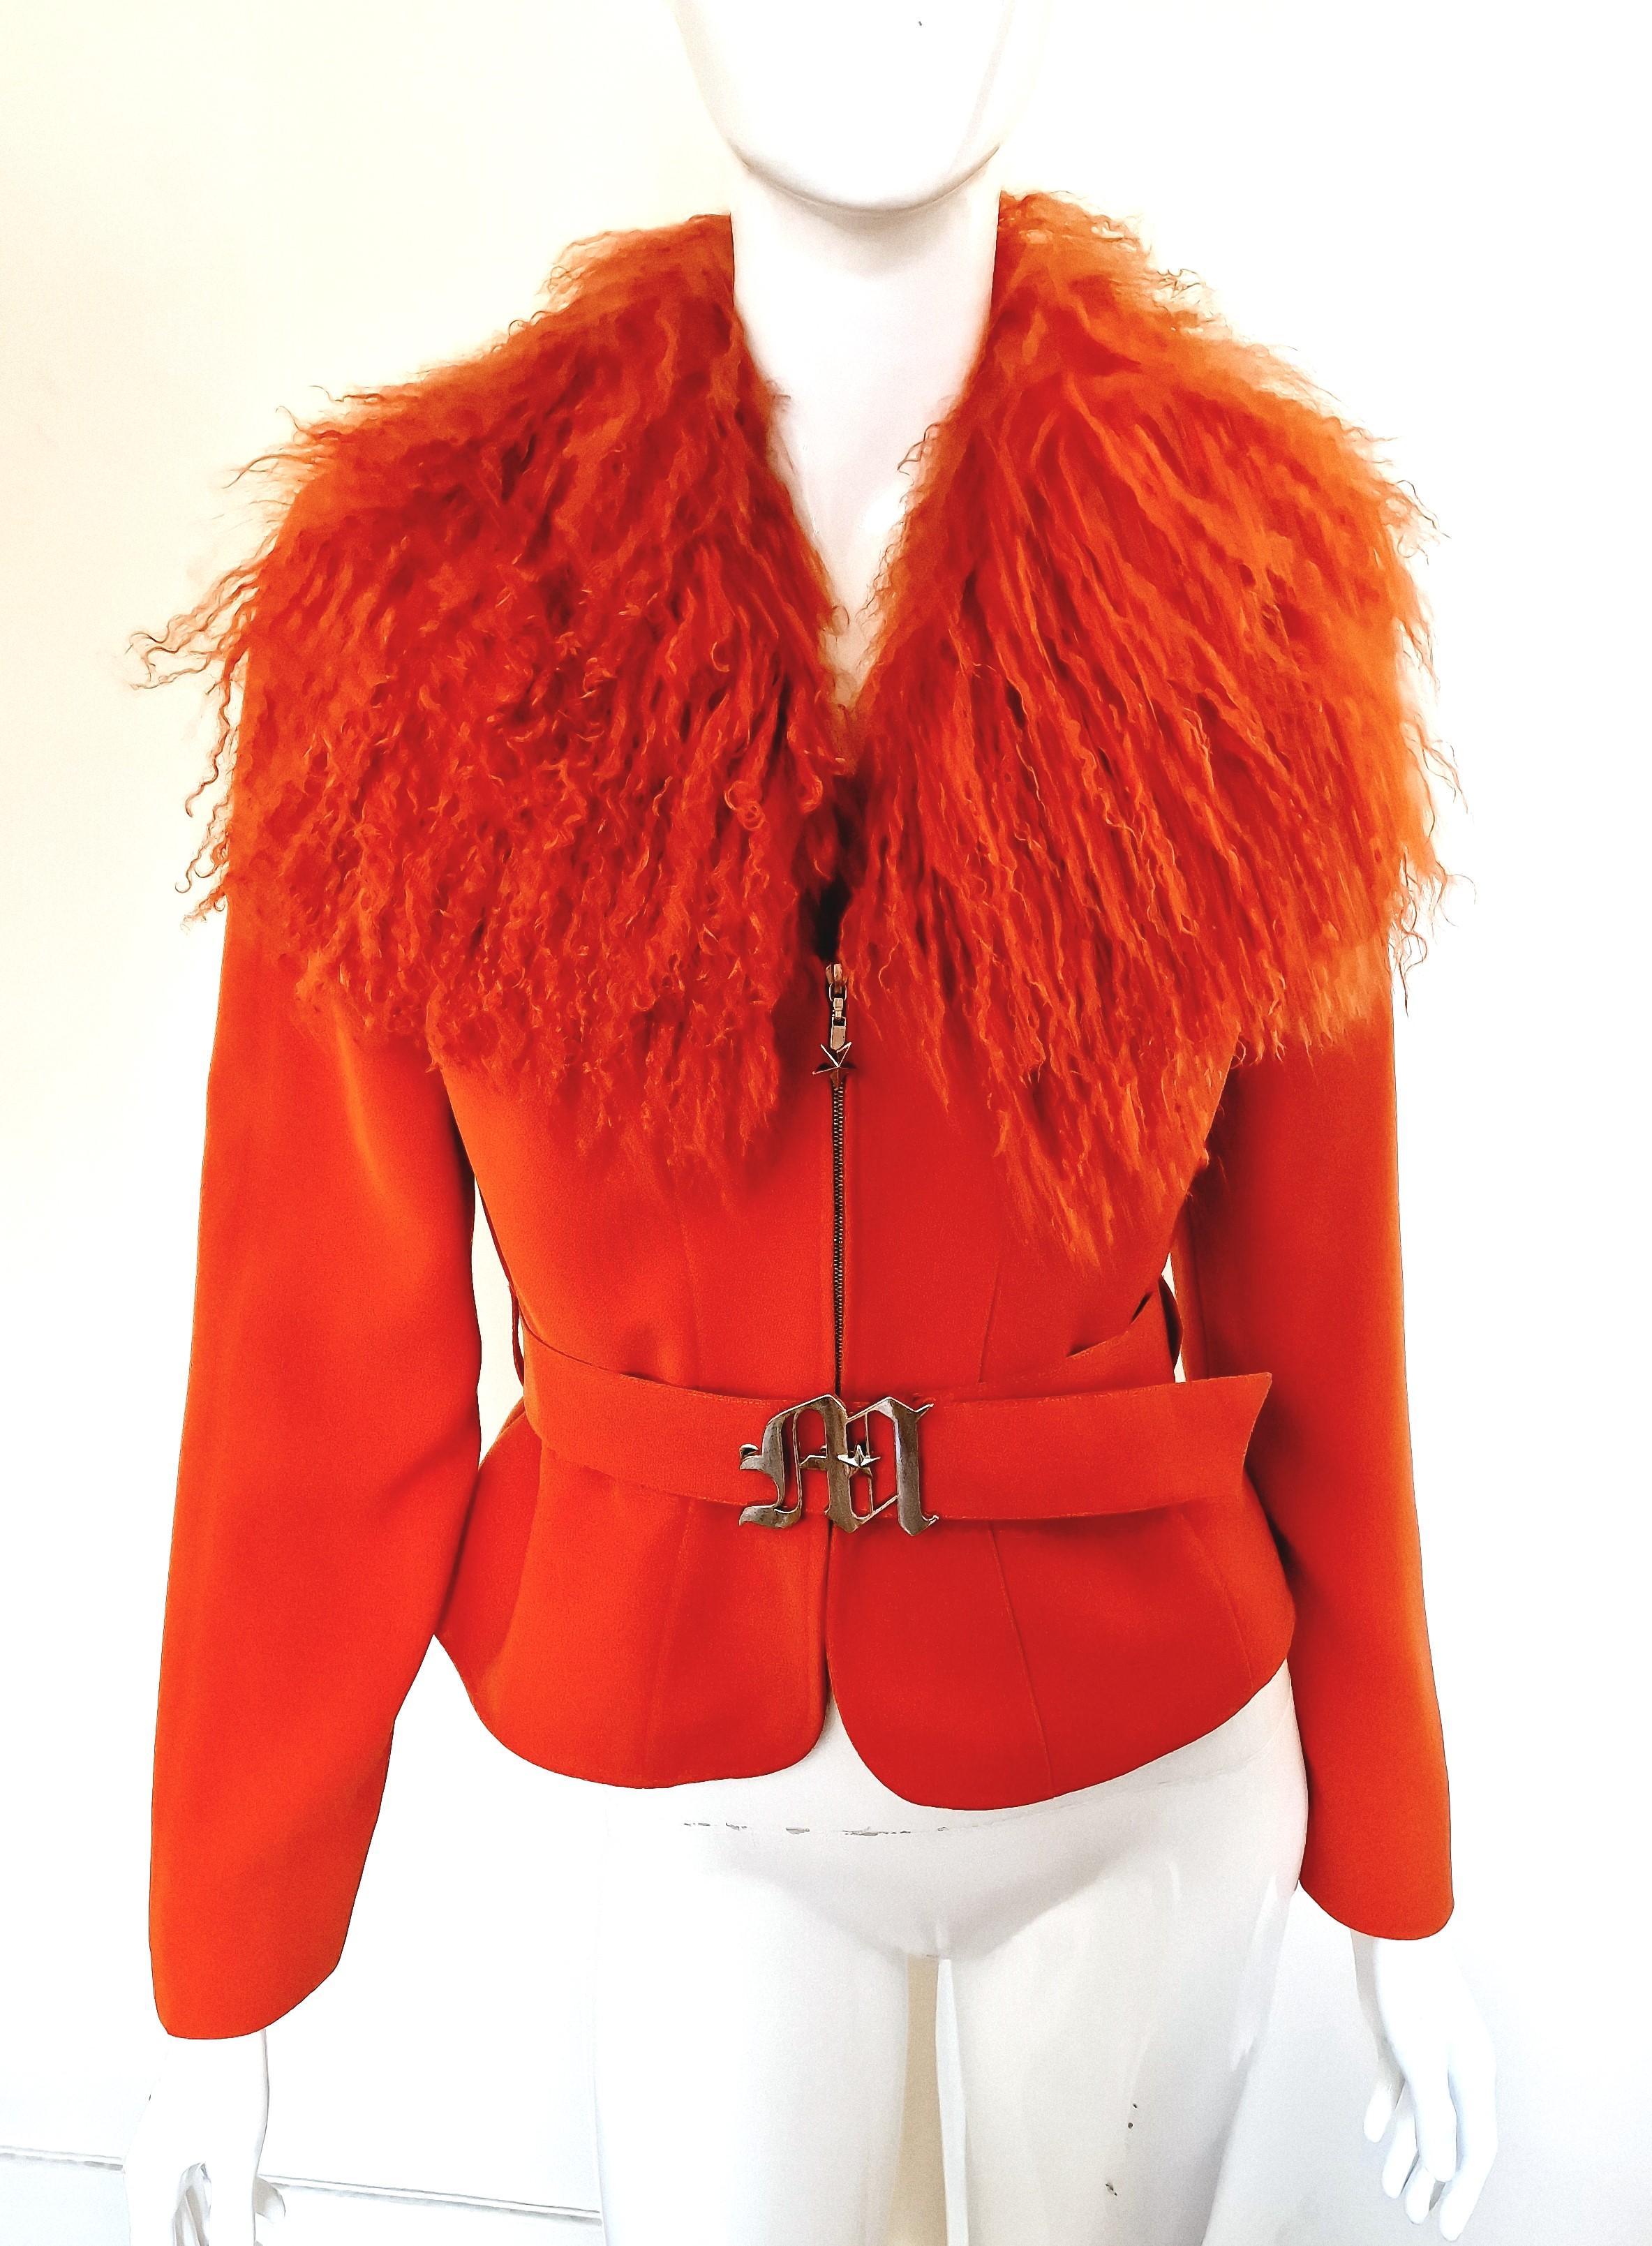 Lamb fur jacket by Thierry Mugler!
Collar: removable Mongolian Lamb fur.
You can wear it with or without the attachable collar!
With shoulder pads!
Wonderful silhouette!
Wasp Waist look.
Metal *M* belt.
Metal star zipper.

VERY GOOD